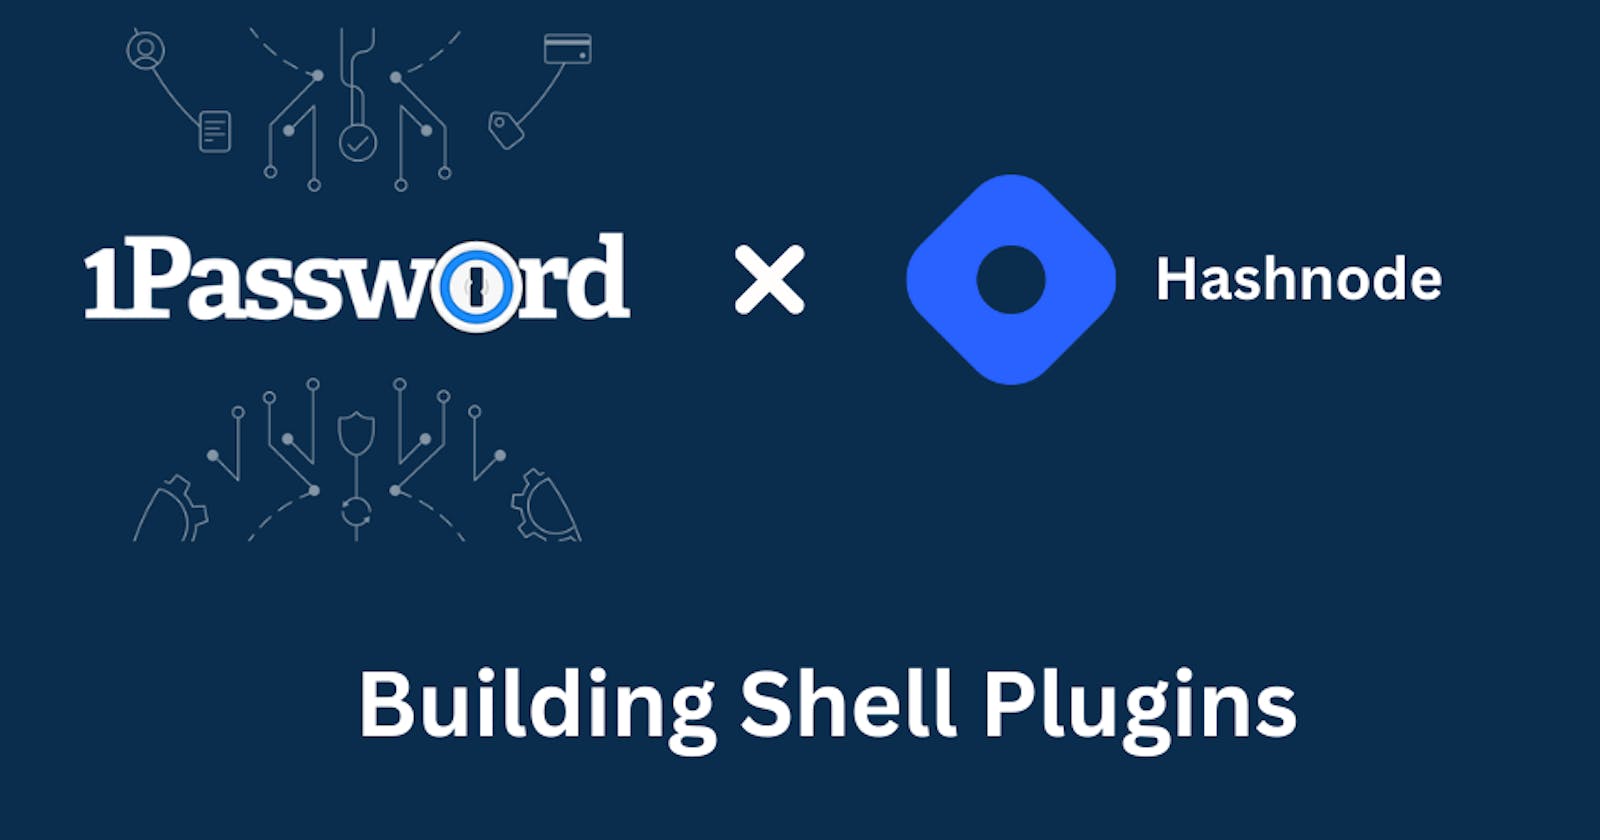 Journey of Building 1Password Shell Plugins